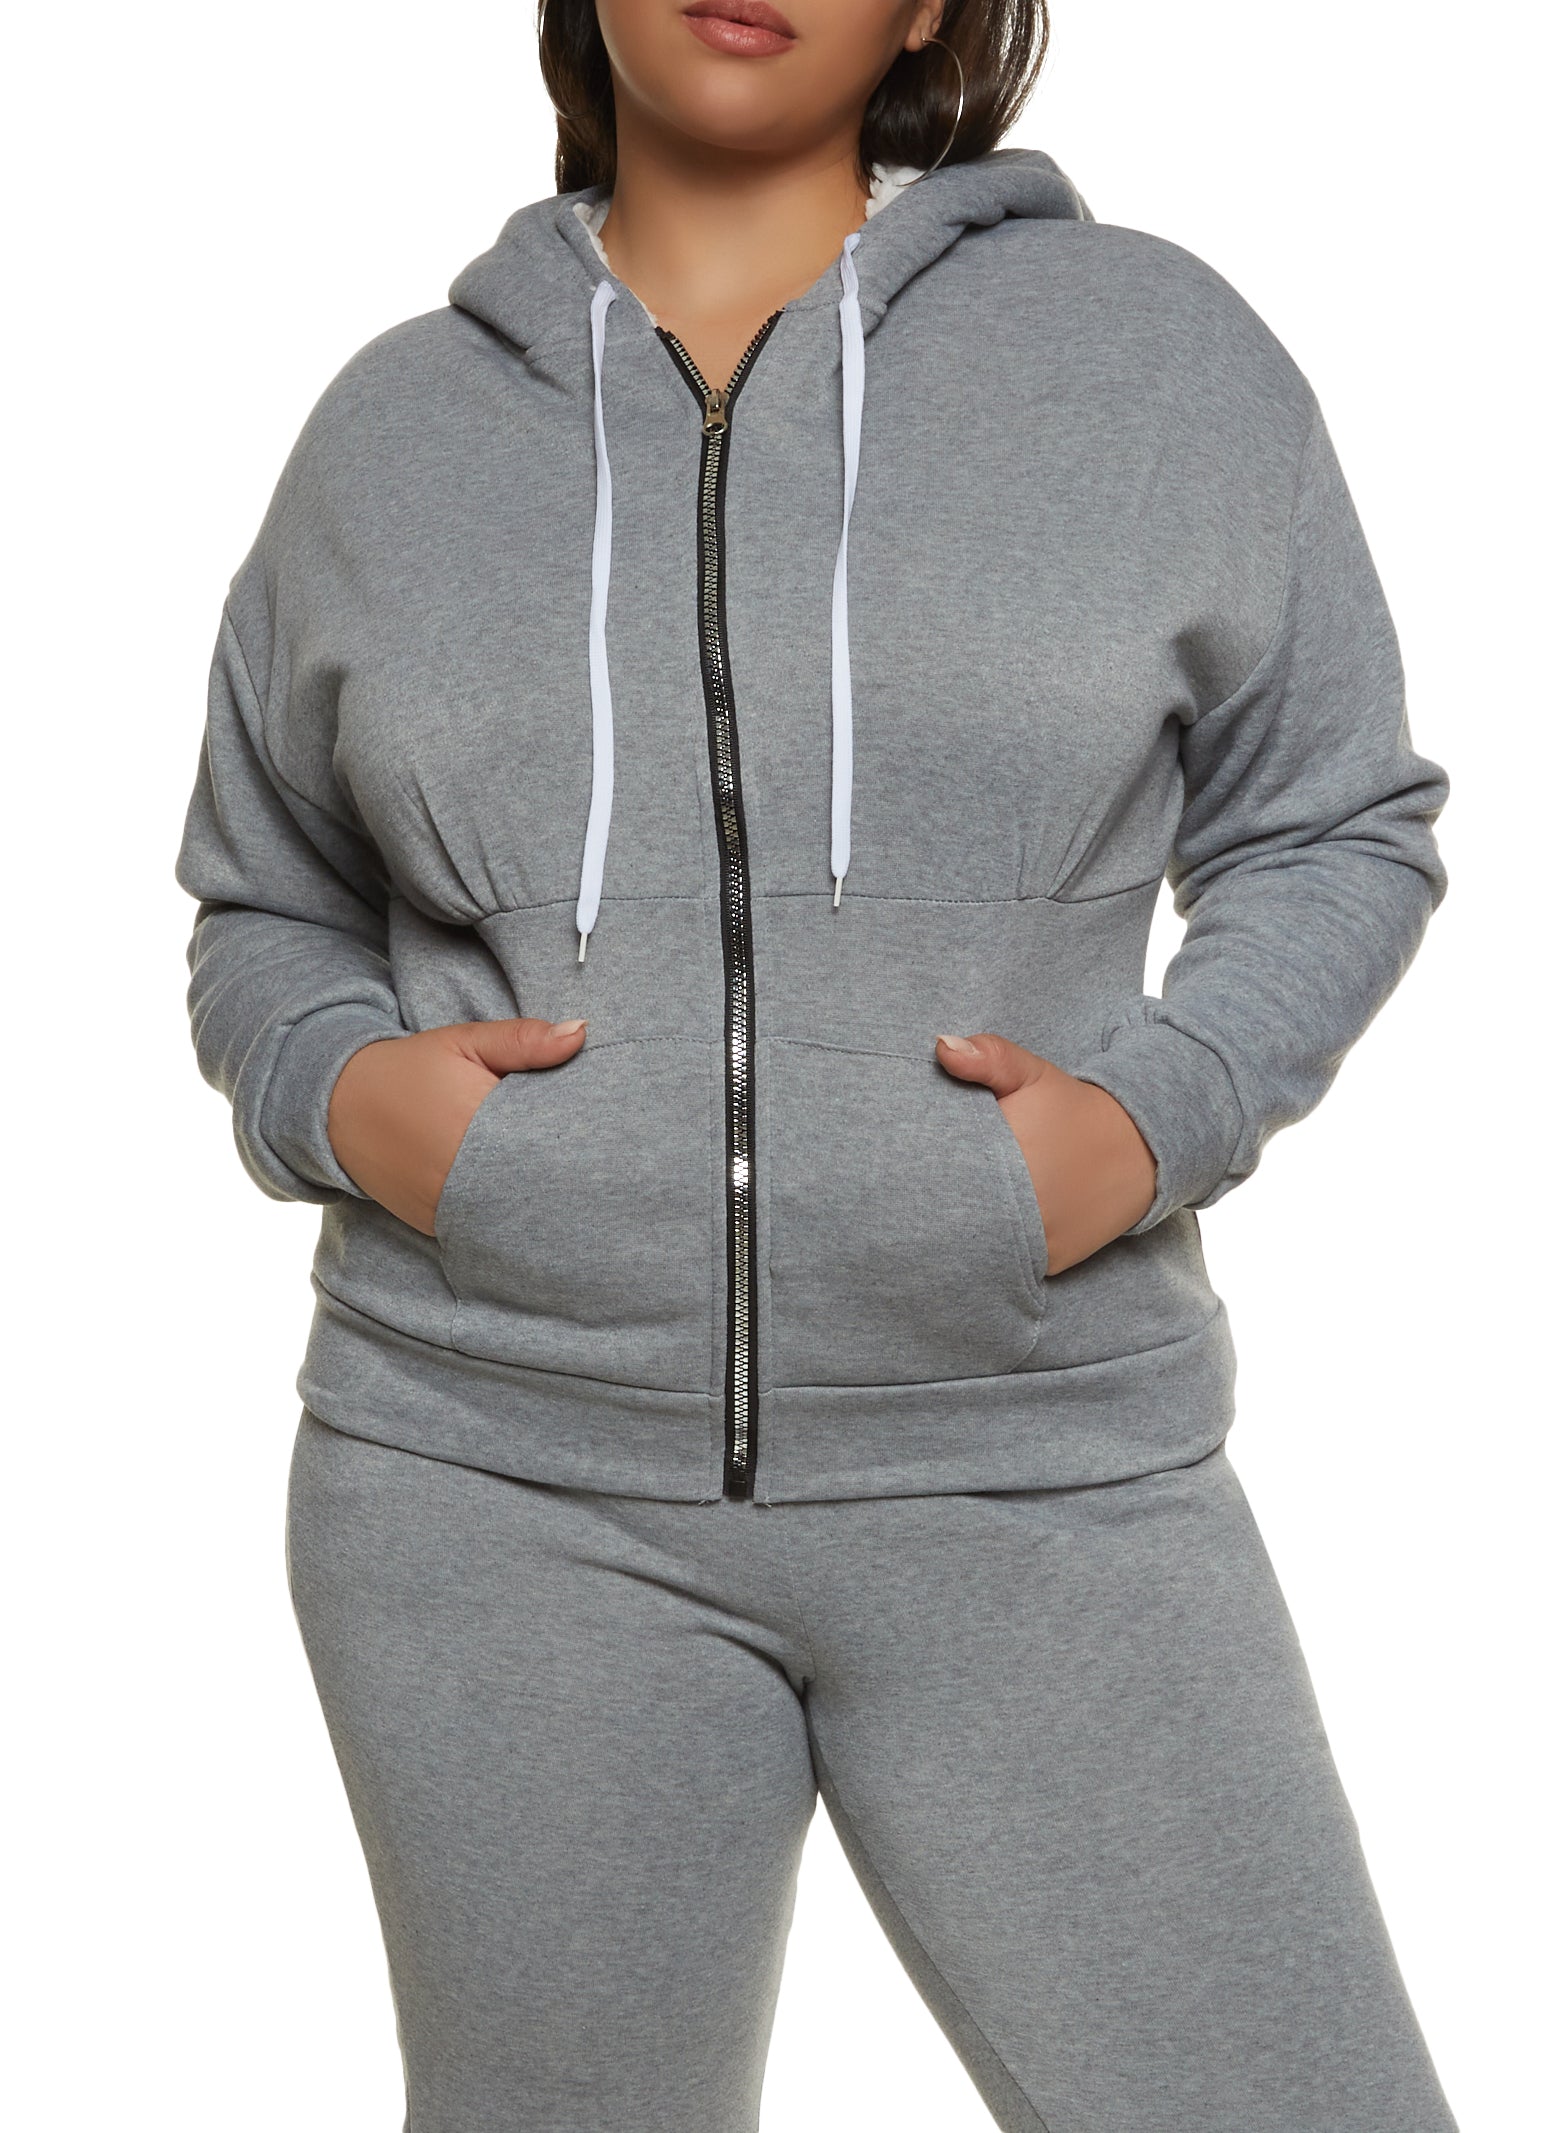 Plus Size Zip Front Sherpa Lined Hoodie